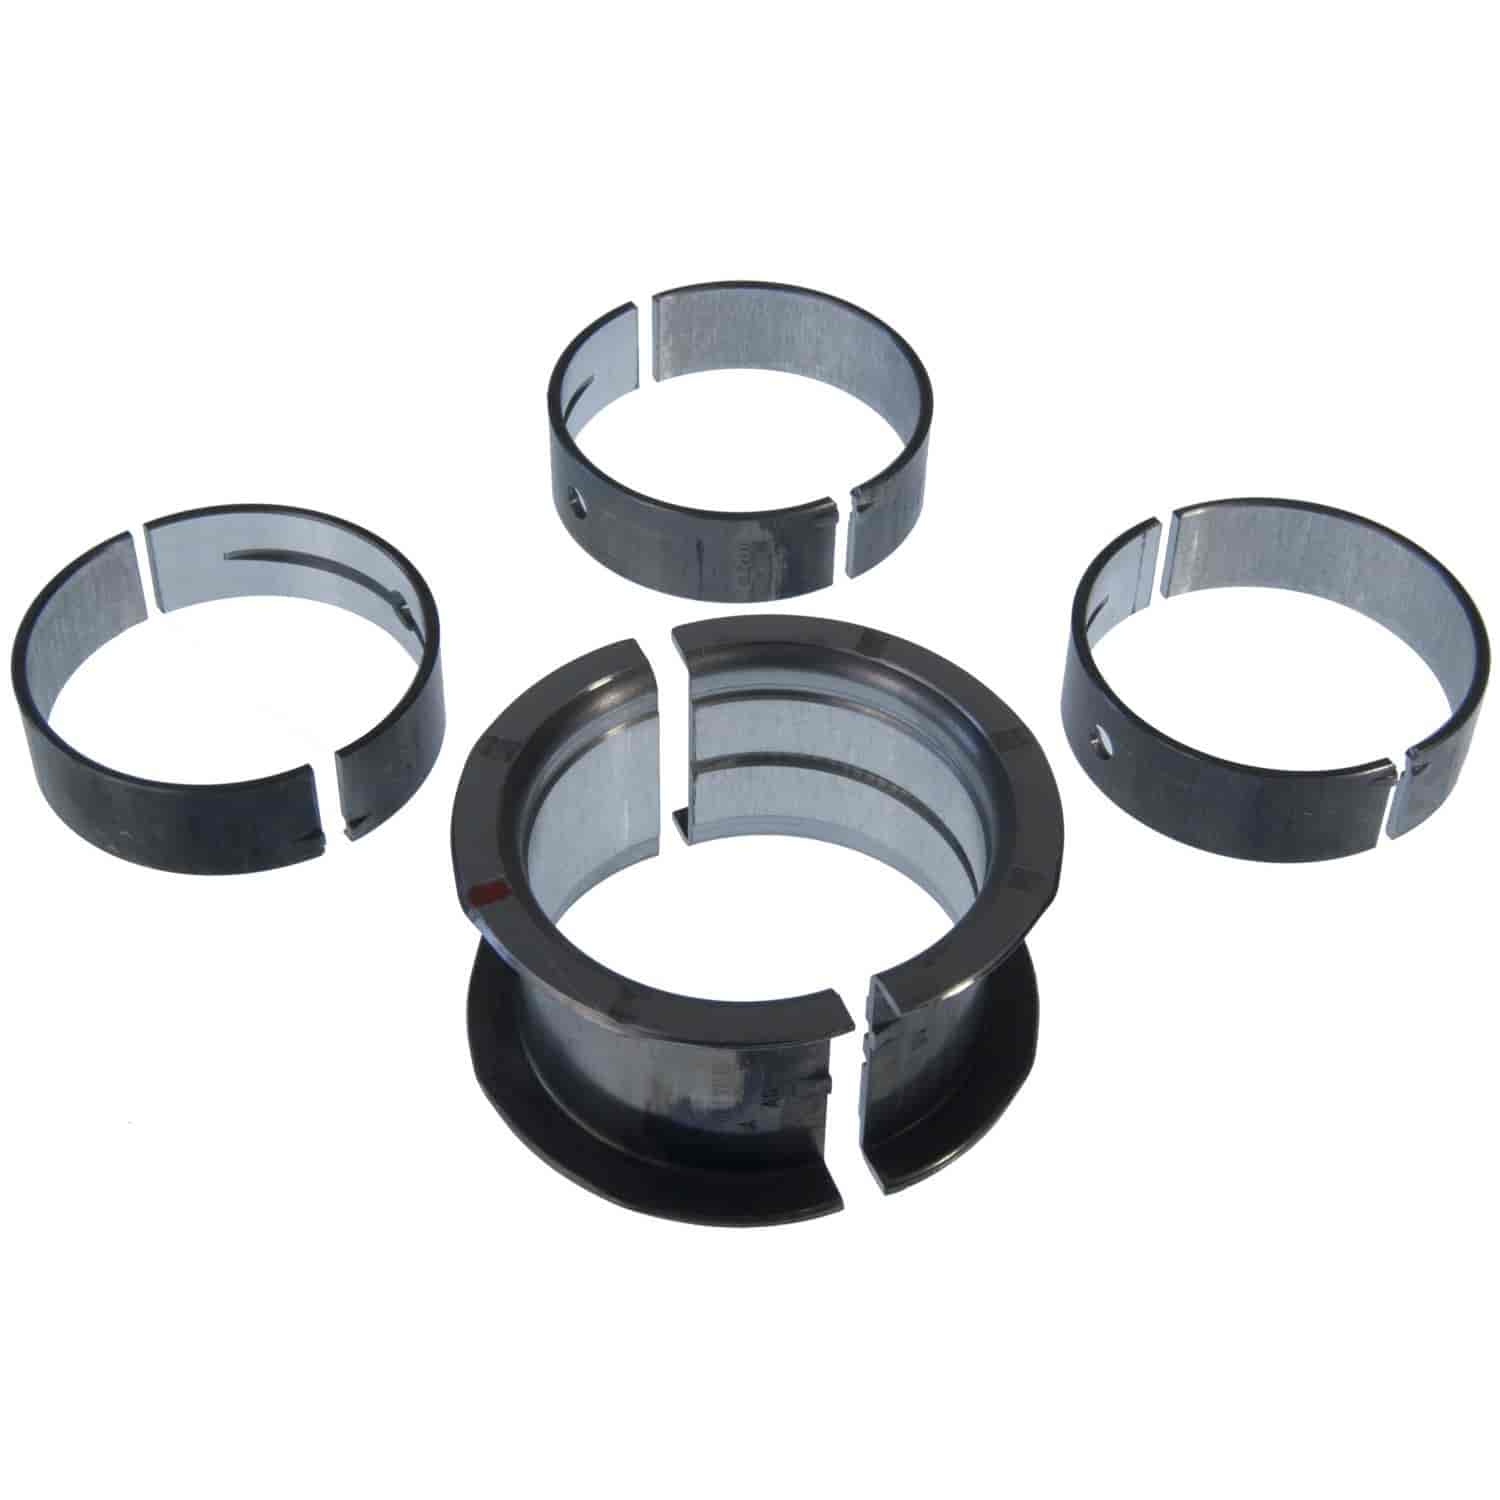 Main Bearing Set GM/Chevy 1978-2013 90 Degree V6 200/229/262ci (3.3/3.8/4.3L) with -.040" Undersize